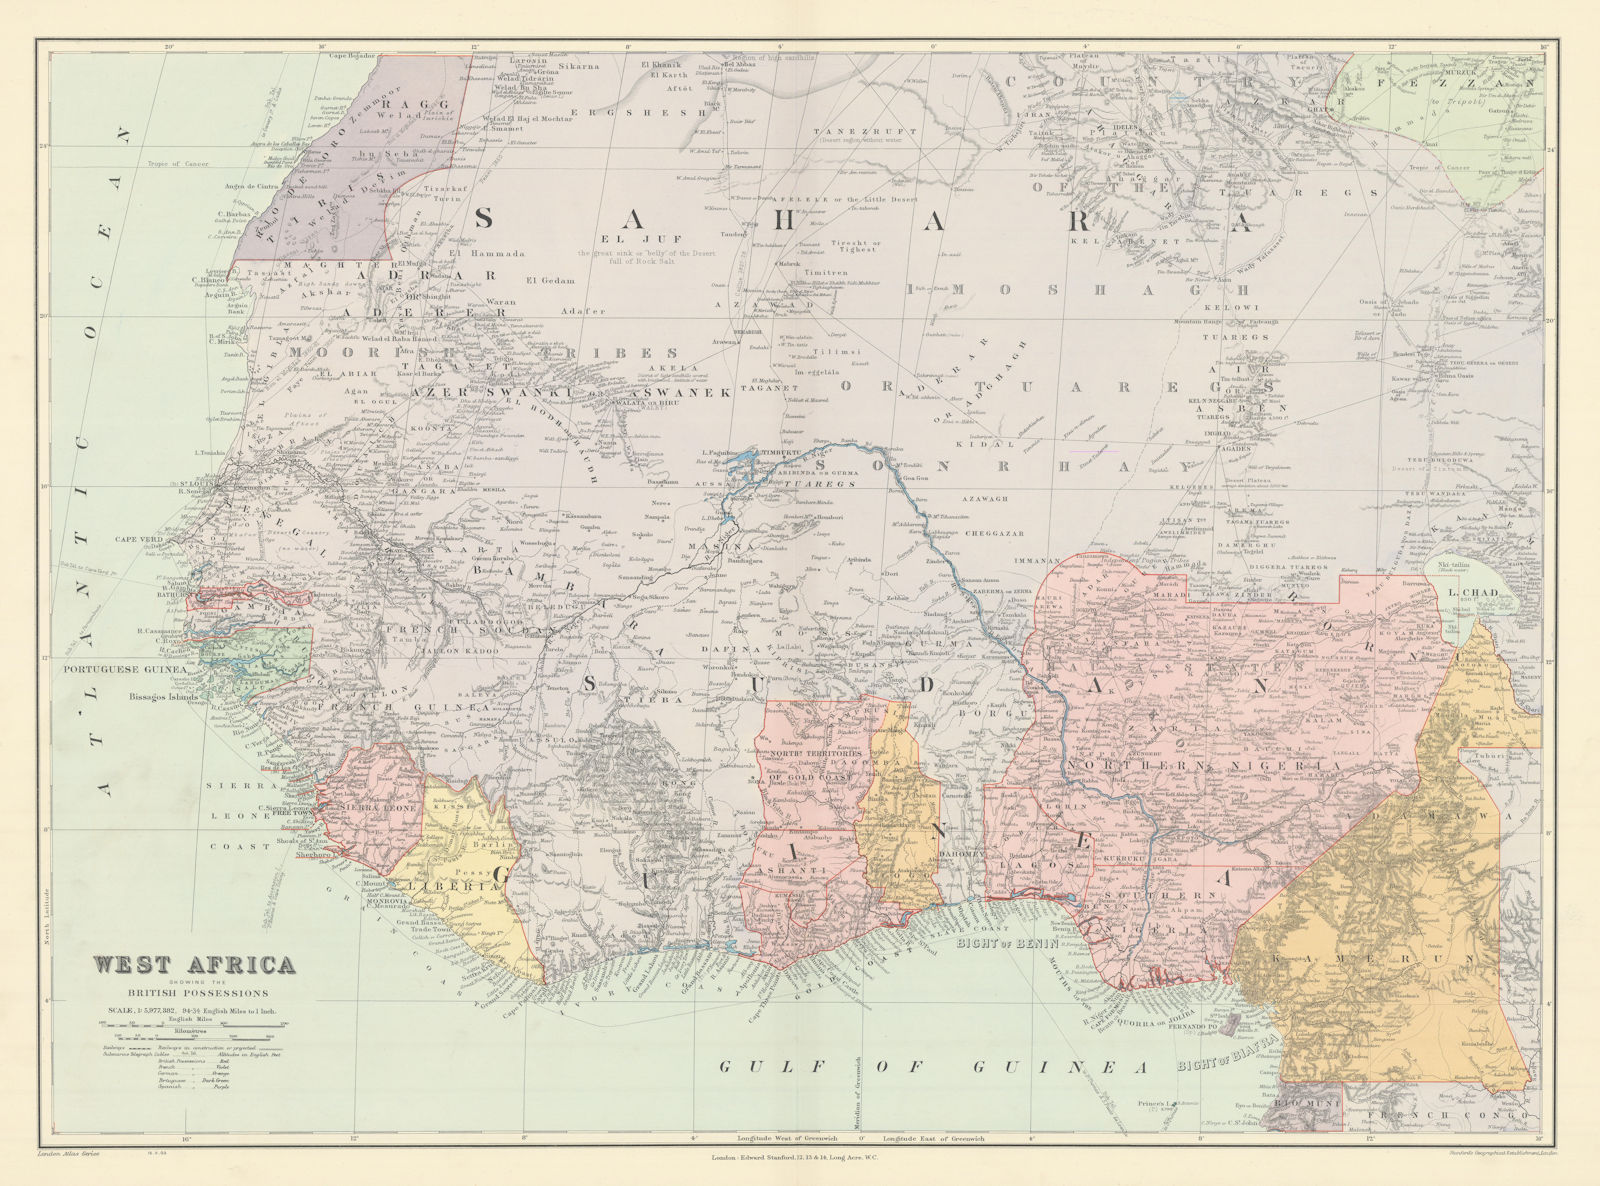 West Africa showing British Possessions. Nigeria Gold Coast. STANFORD 1904 map